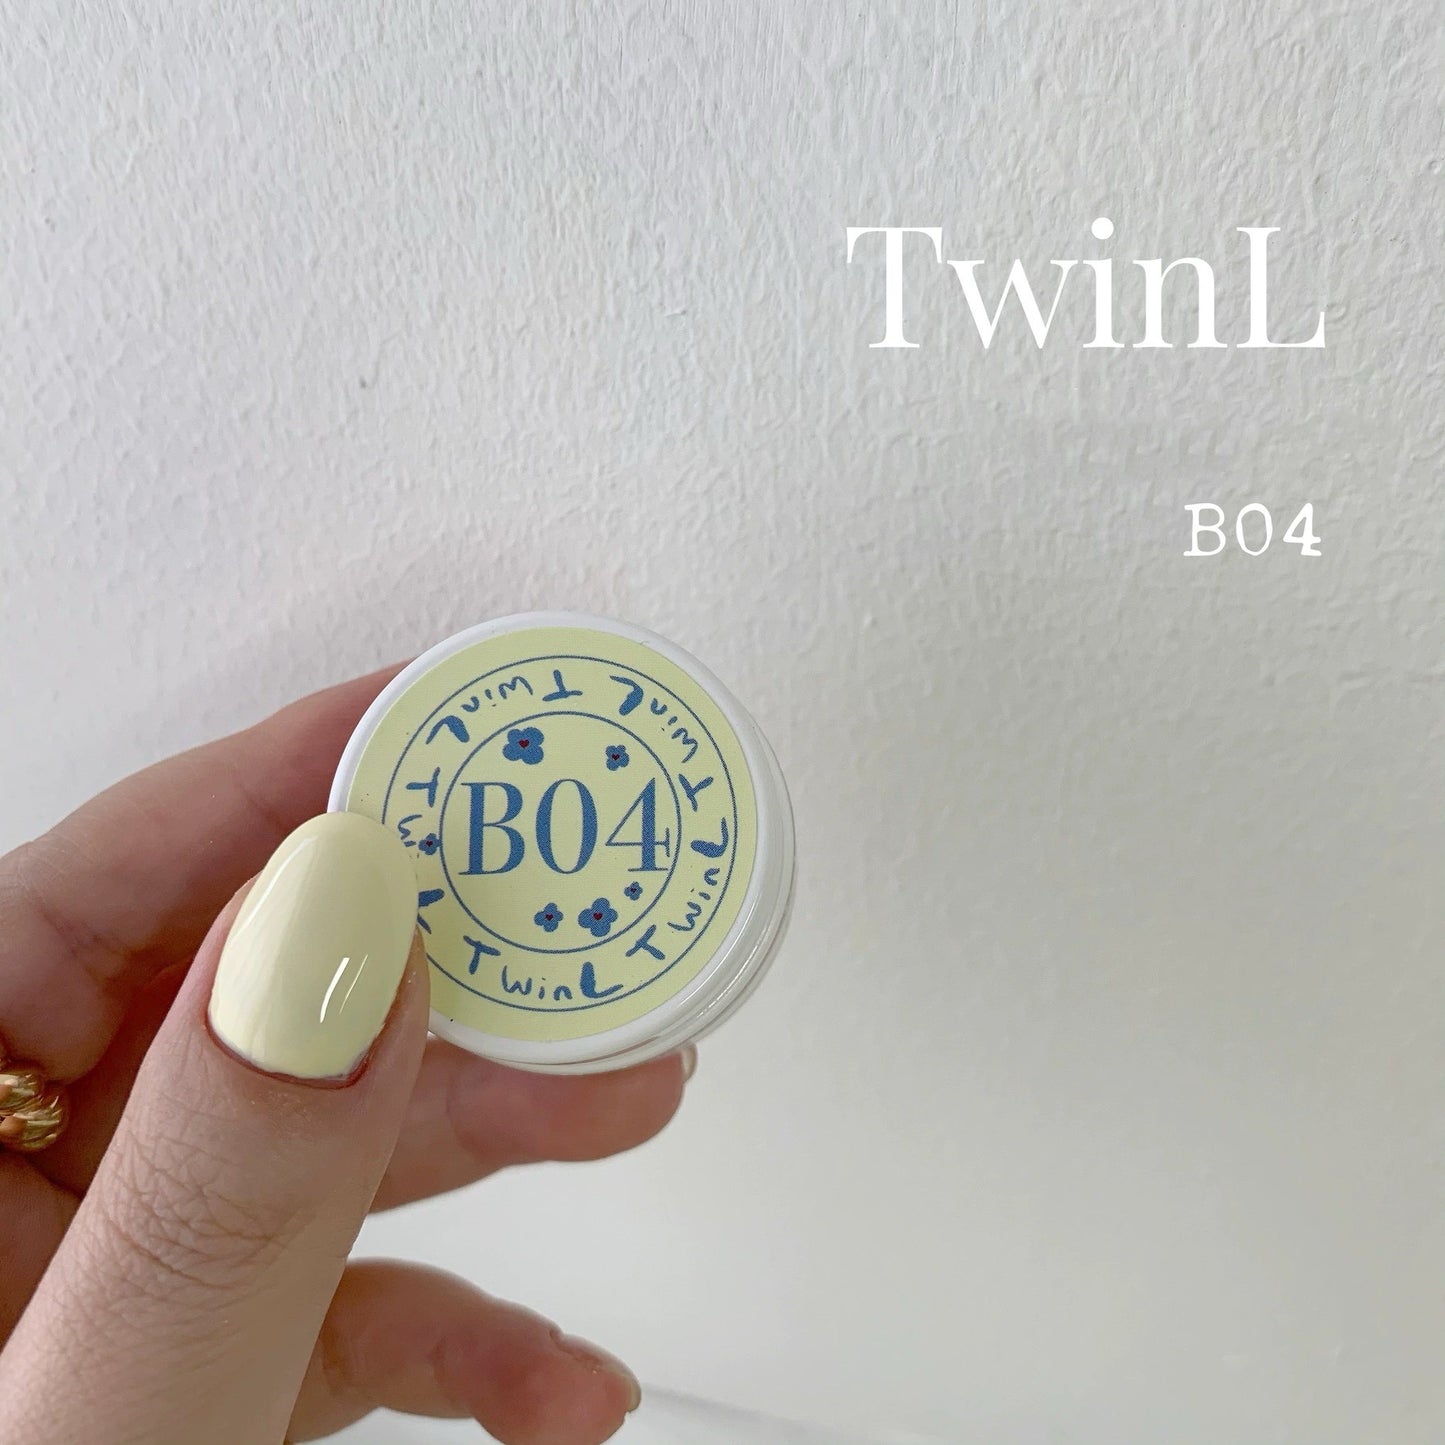 Whispering Pastels Collection B01-B12 TwinL Nail Gel